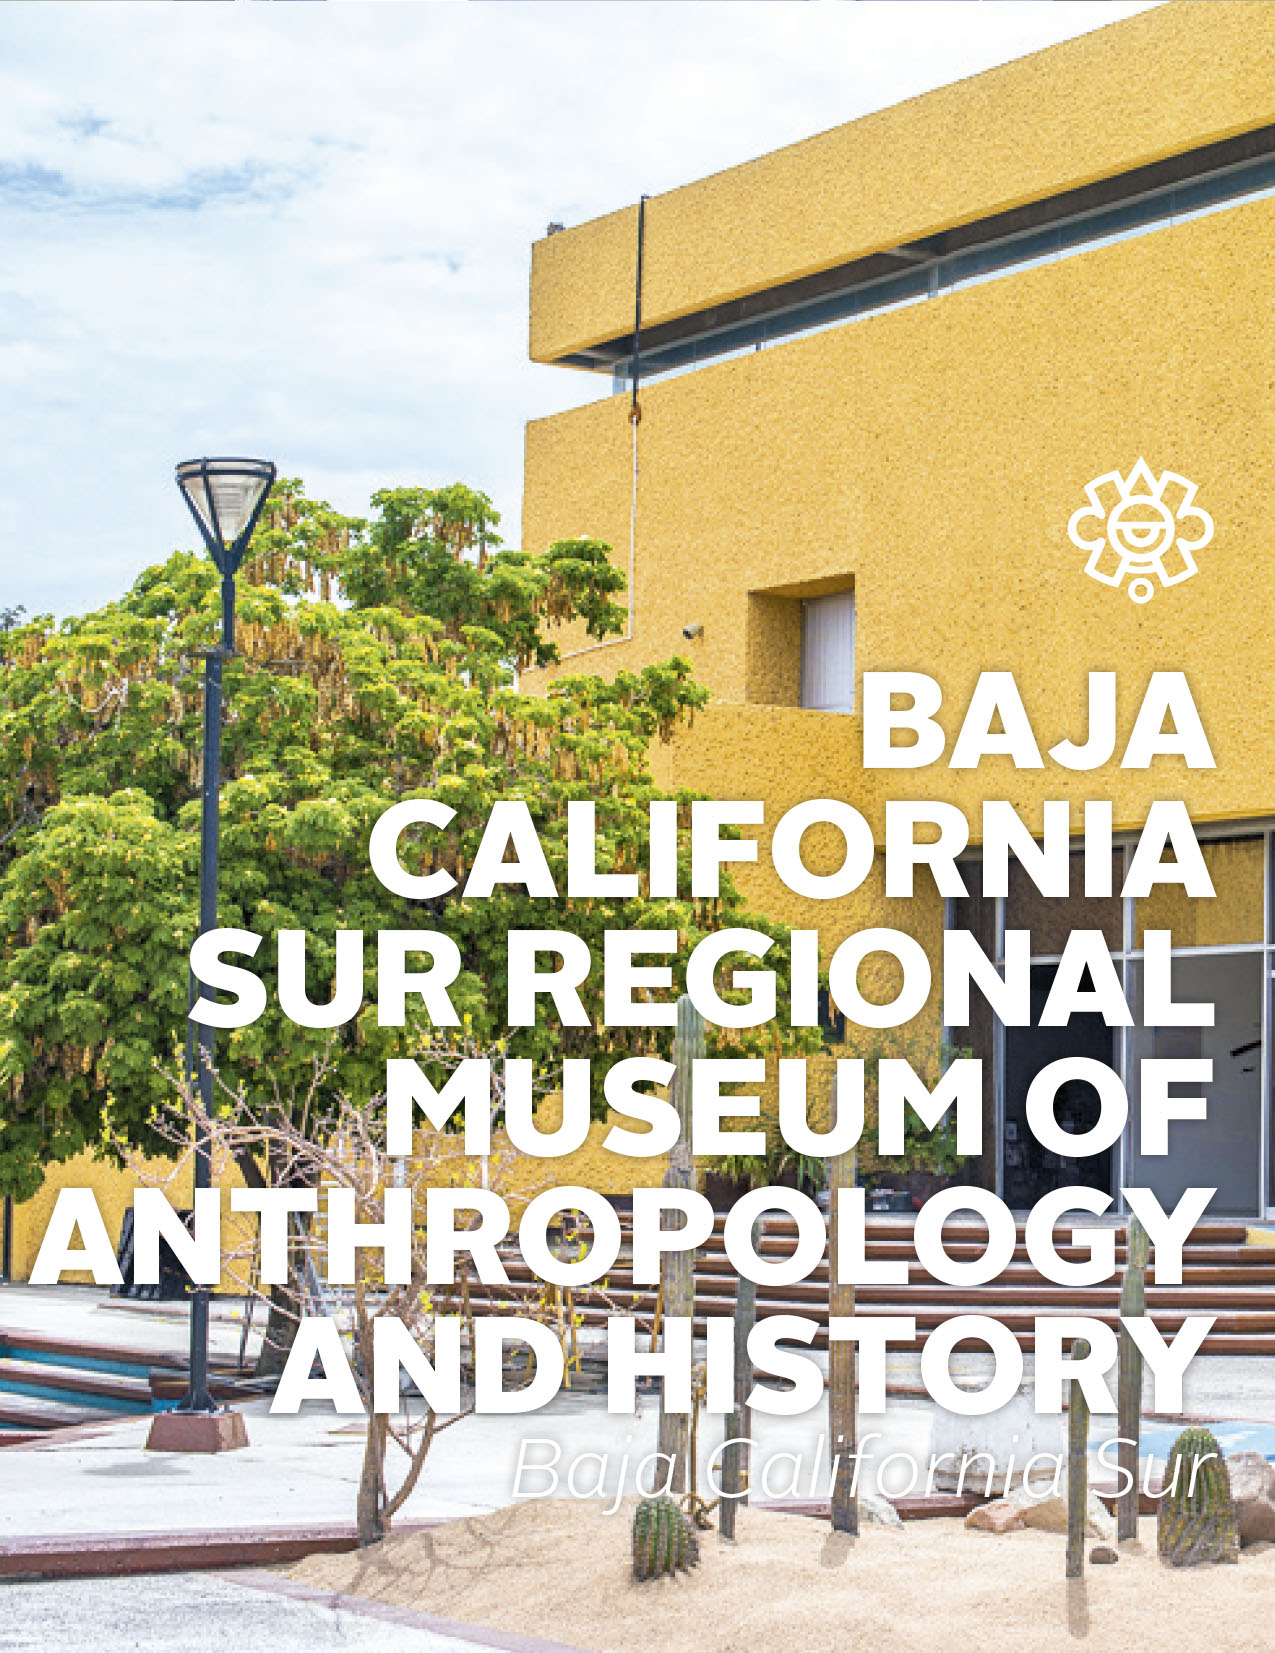 Baja California Sur Regional Museum of Anthropology and History